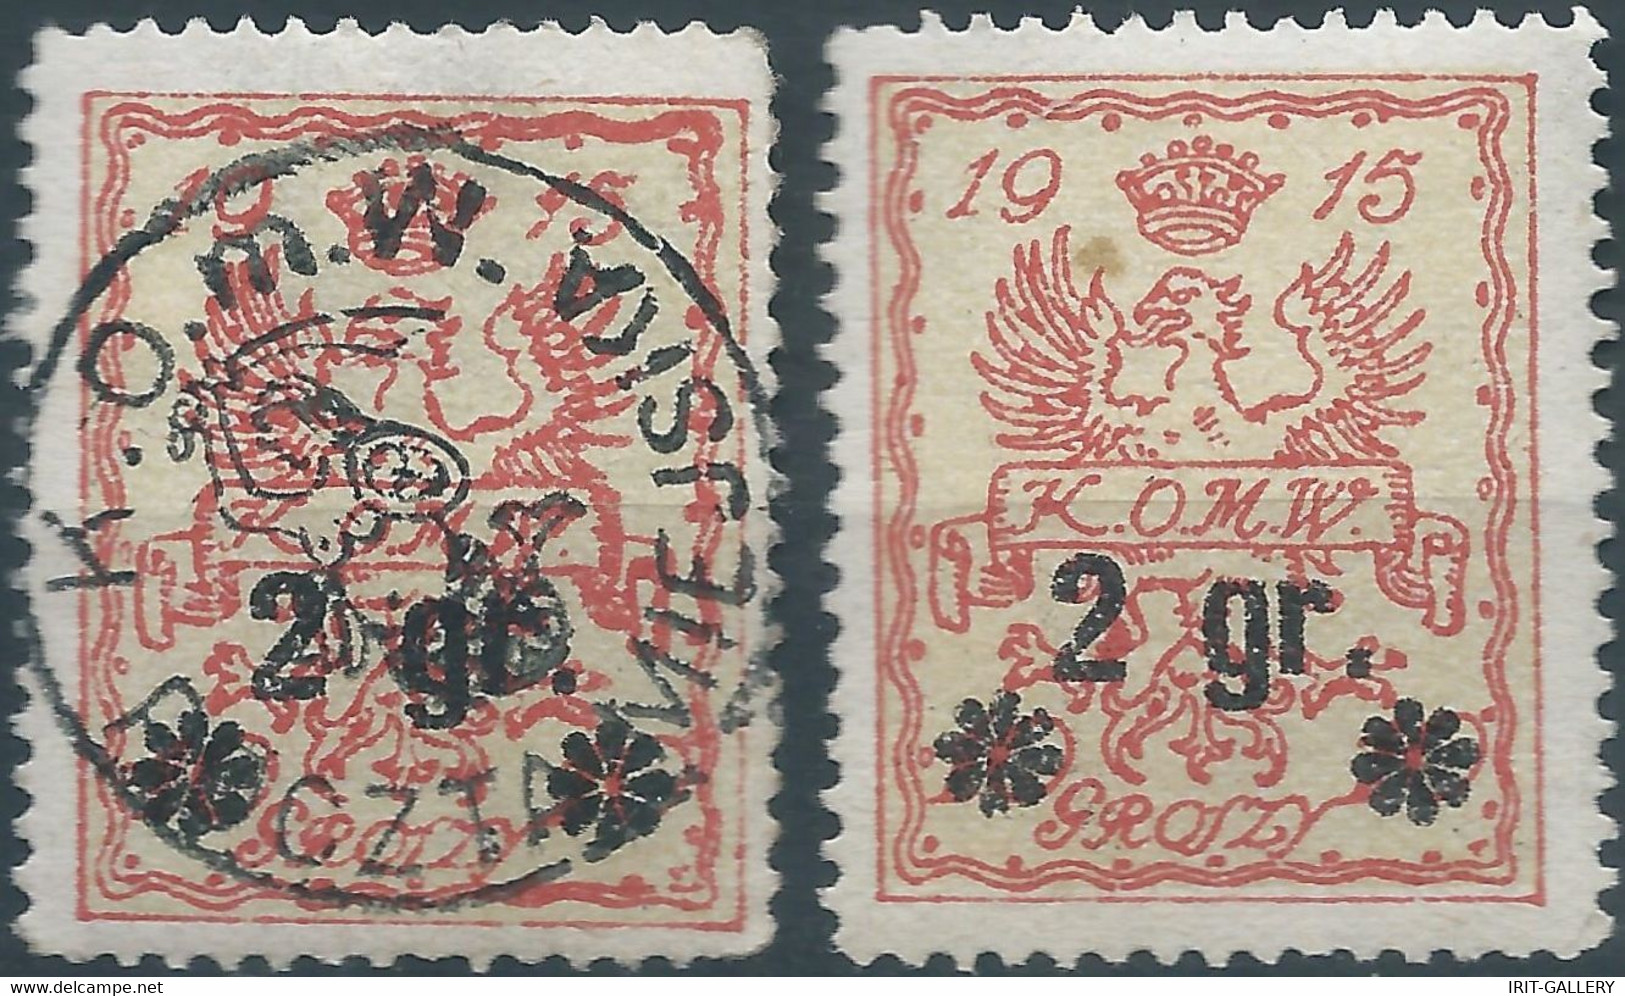 POLONIA-POLAND-POLSKA,1915 Warsaw Local Issues,10 GROSZY/ 2 GR,Obliterated And Mint - Ungebraucht